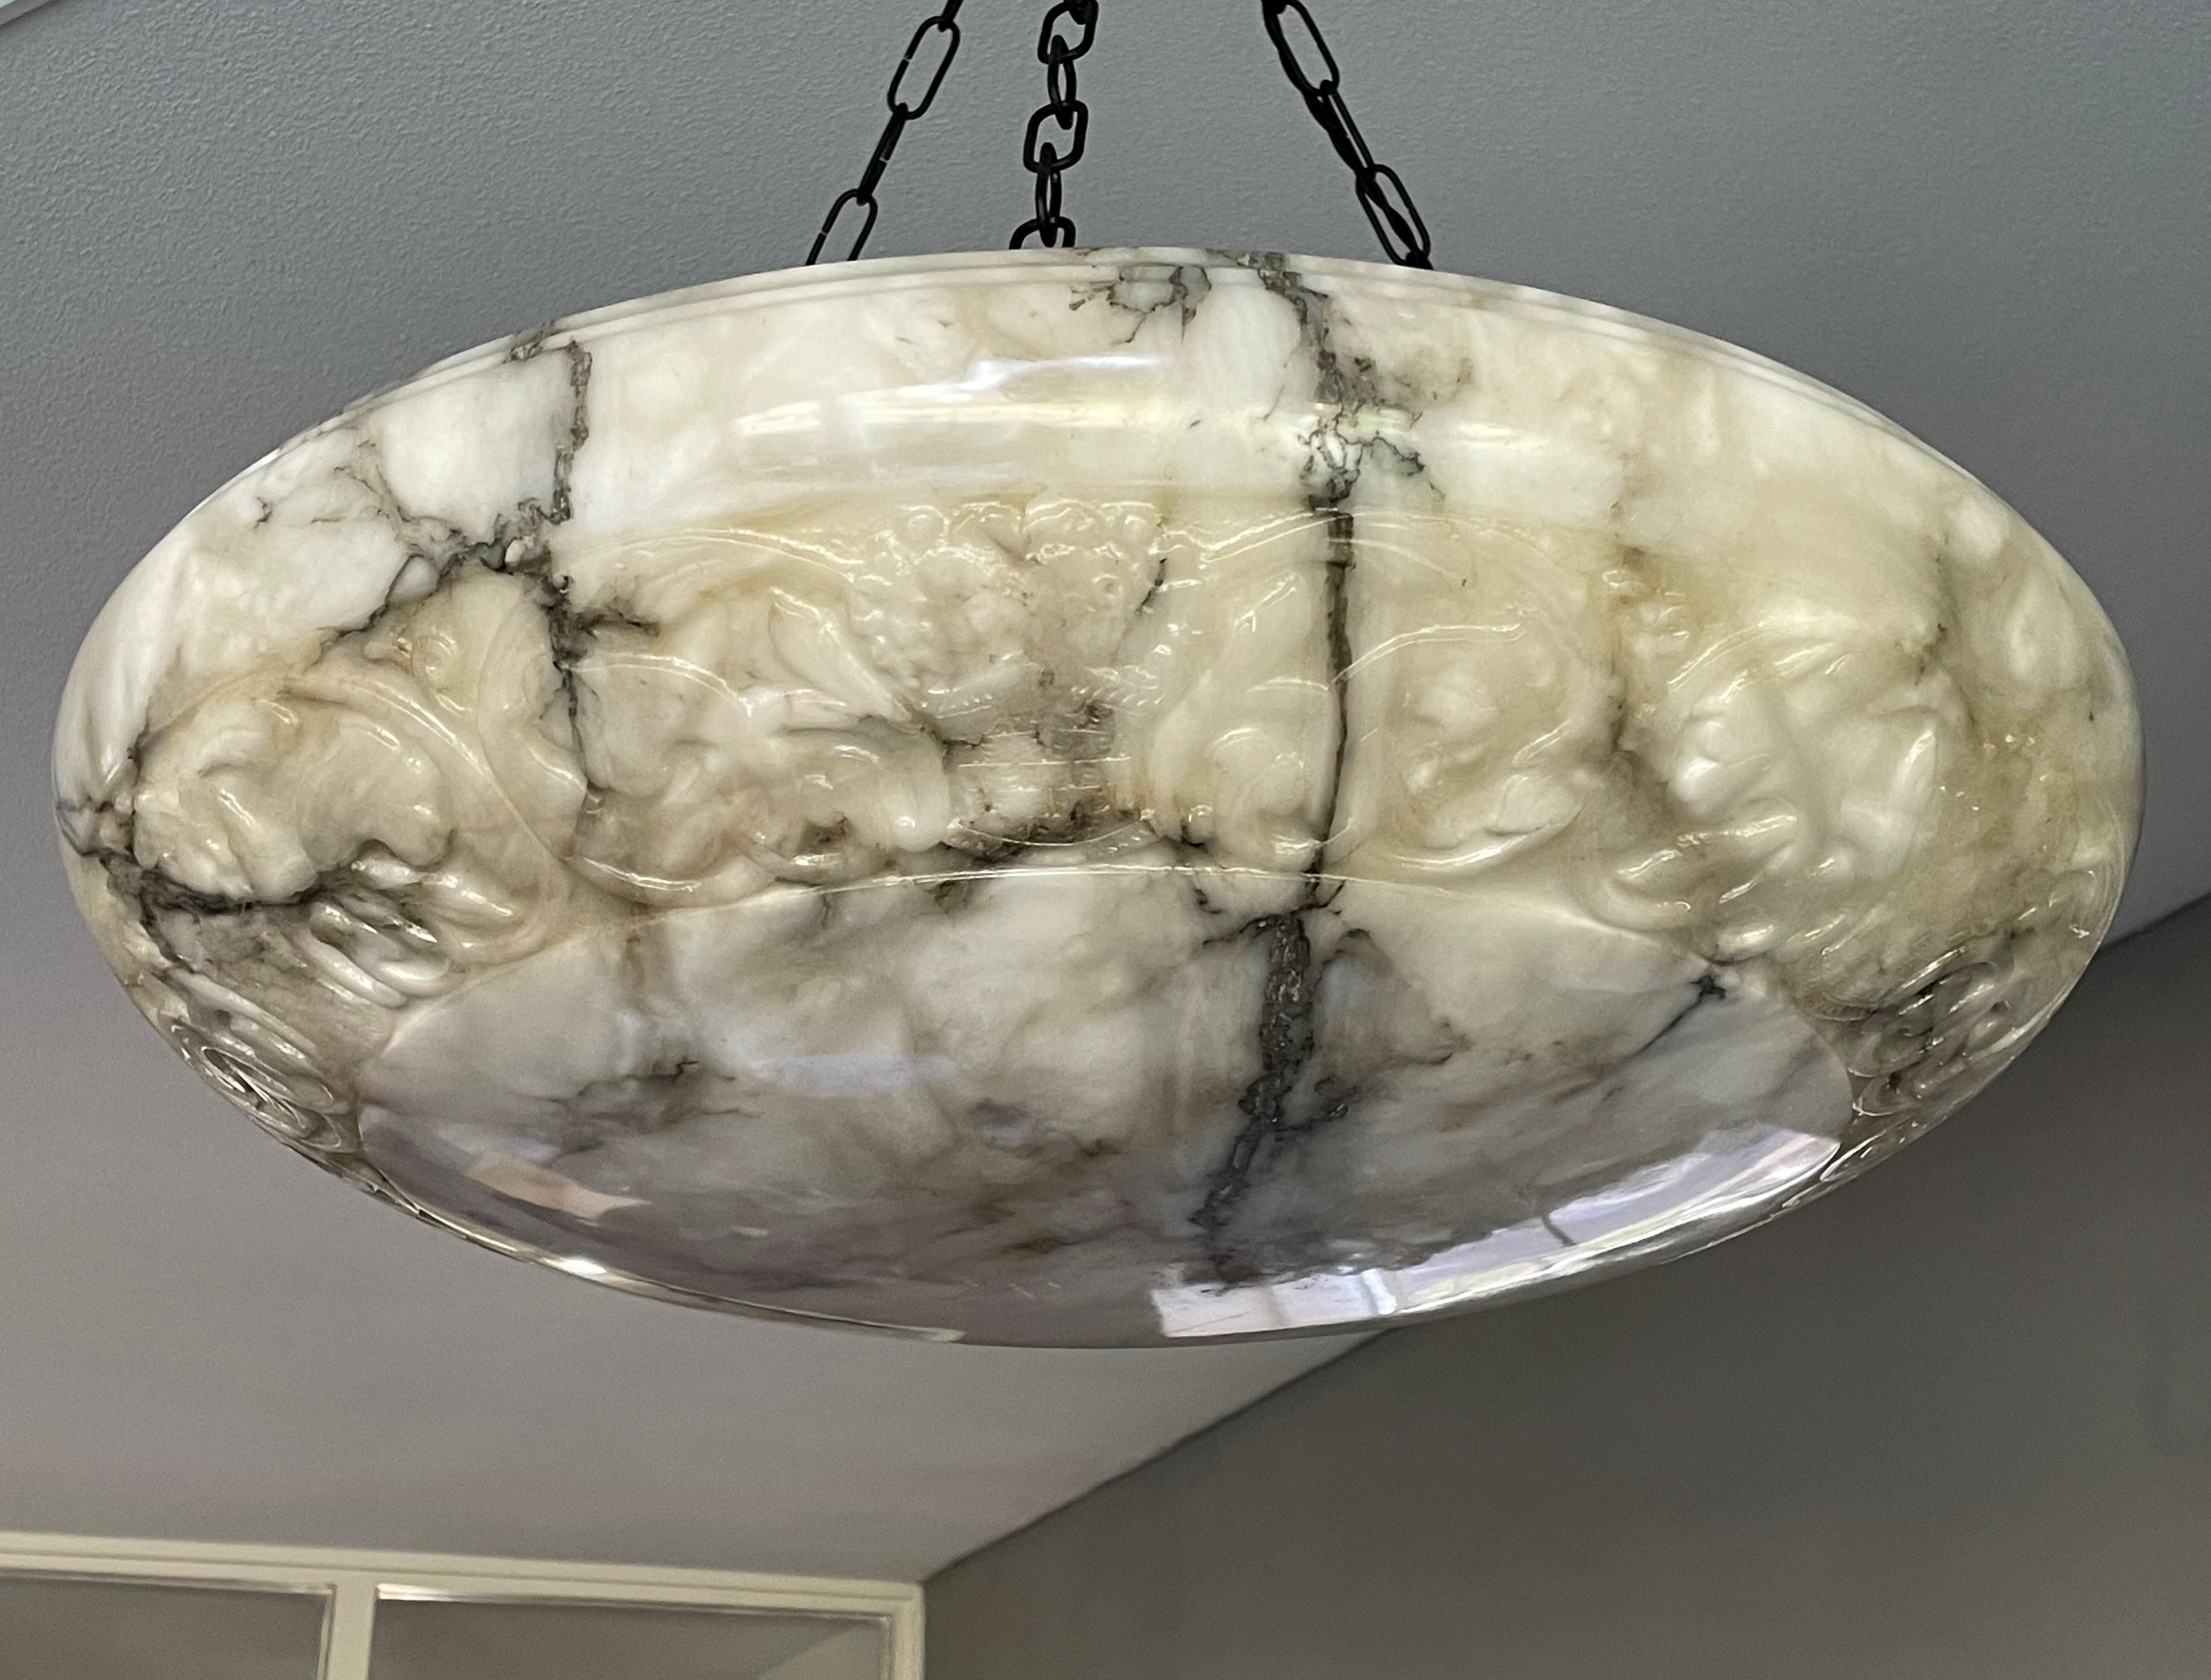 Super size and great design, hand carved, antique alabaster chandelier.

Thanks to its large size and timeless dish design, this remarkable alabaster chandelier is the perfect lighting solution for many types of rooms and interiors and it too will